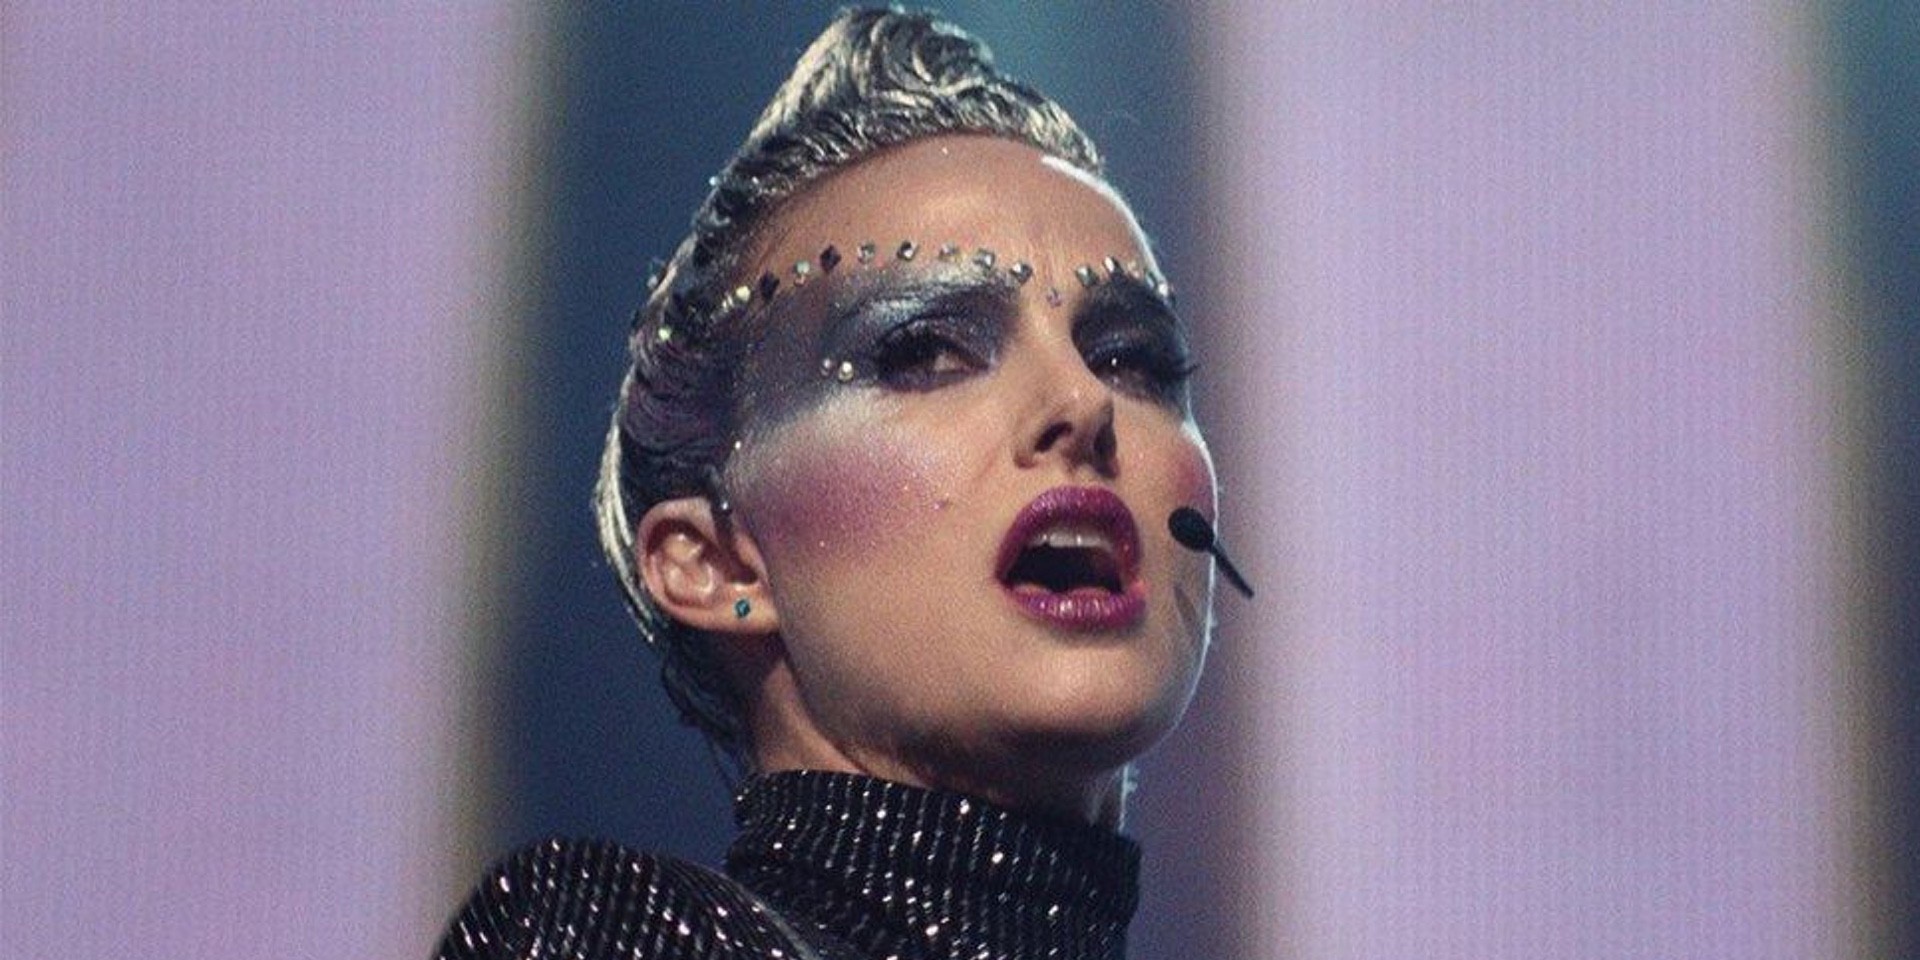 Premiere screenings for Vox Lux during the Singapore International Film Festival announced